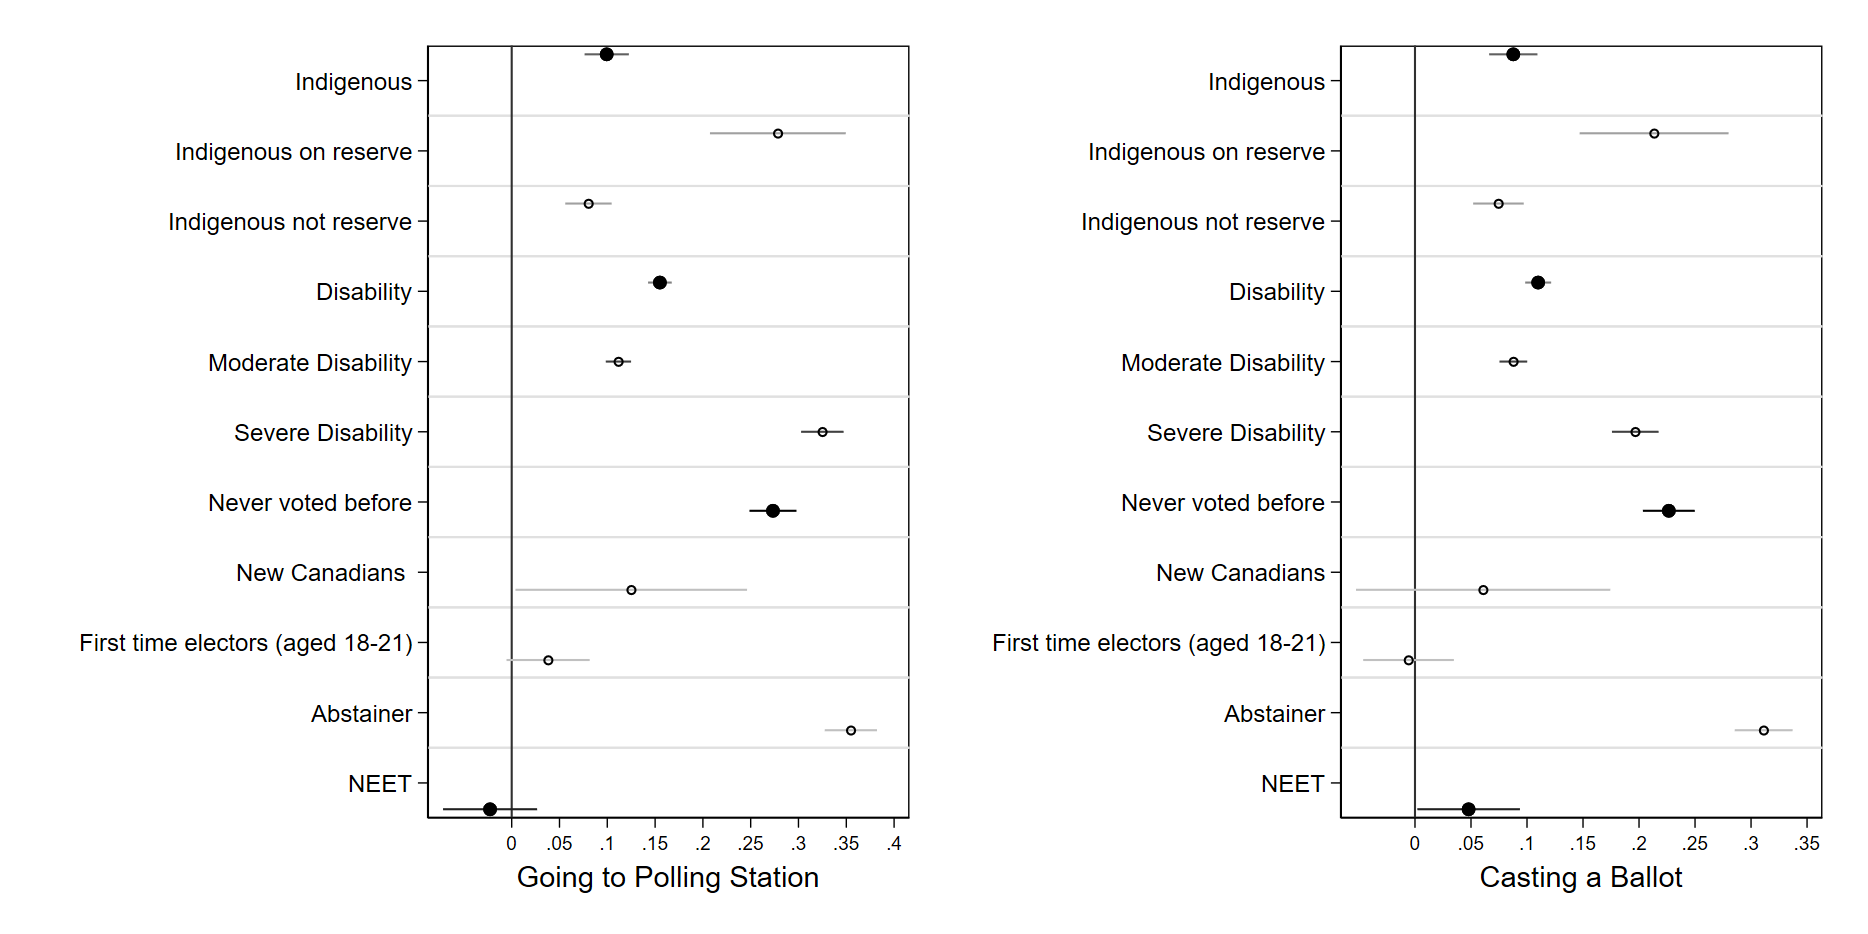 Figure 4.4. How much higher (or lower) are the perceived burdens in various groups, controlling for socio-demographic characteristics: going to the polling station and casting a ballot